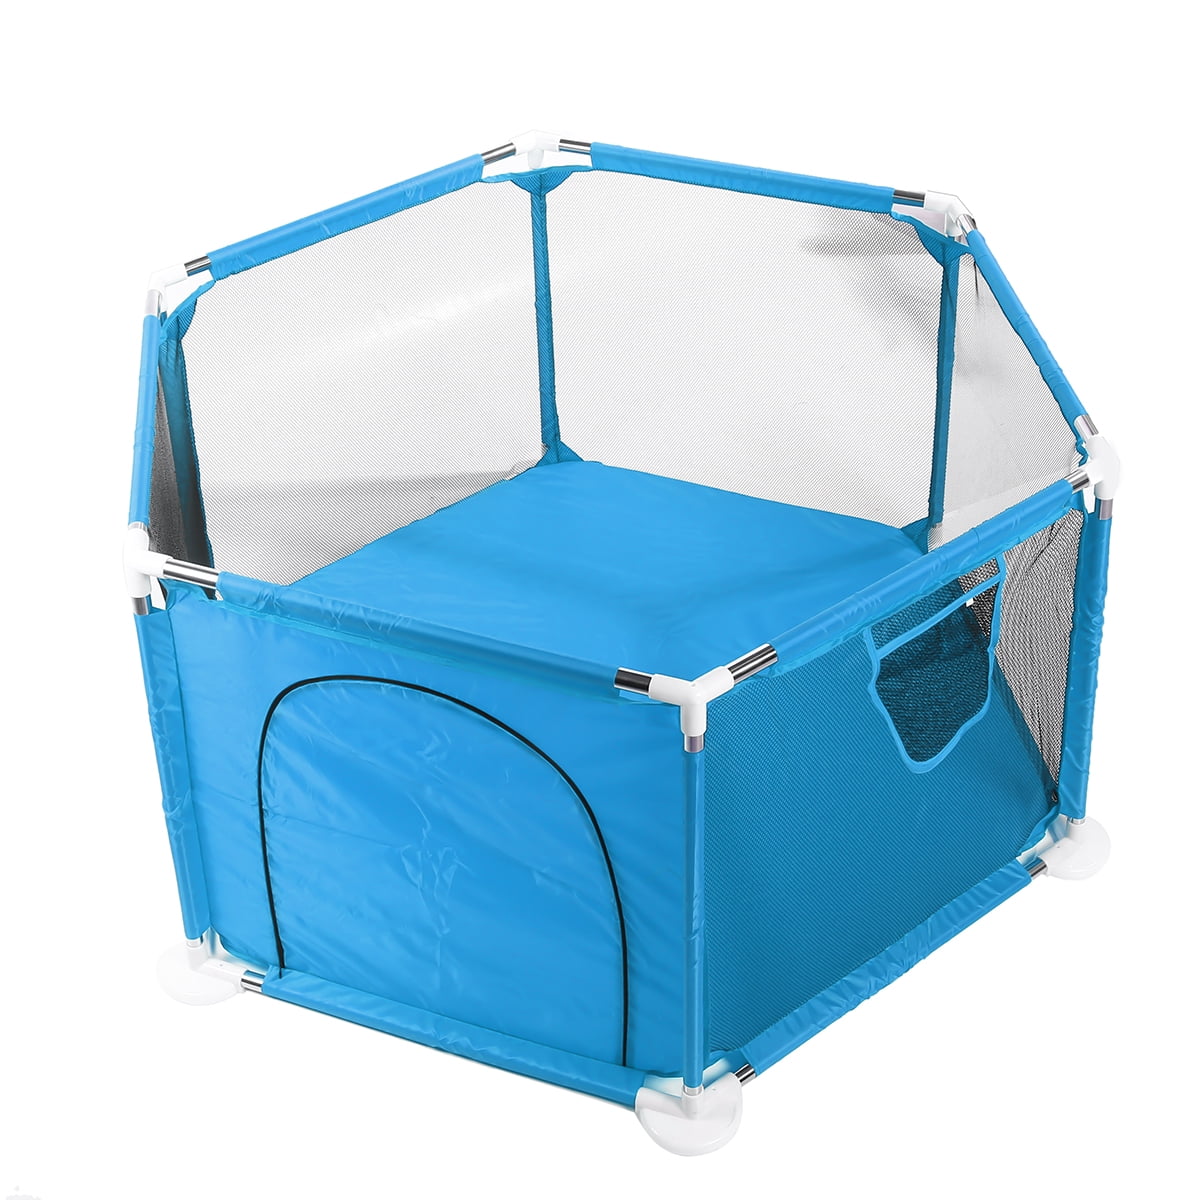 Portable Playard Play Pen for Infants and Babies Lightweight Mesh Baby Playpen 